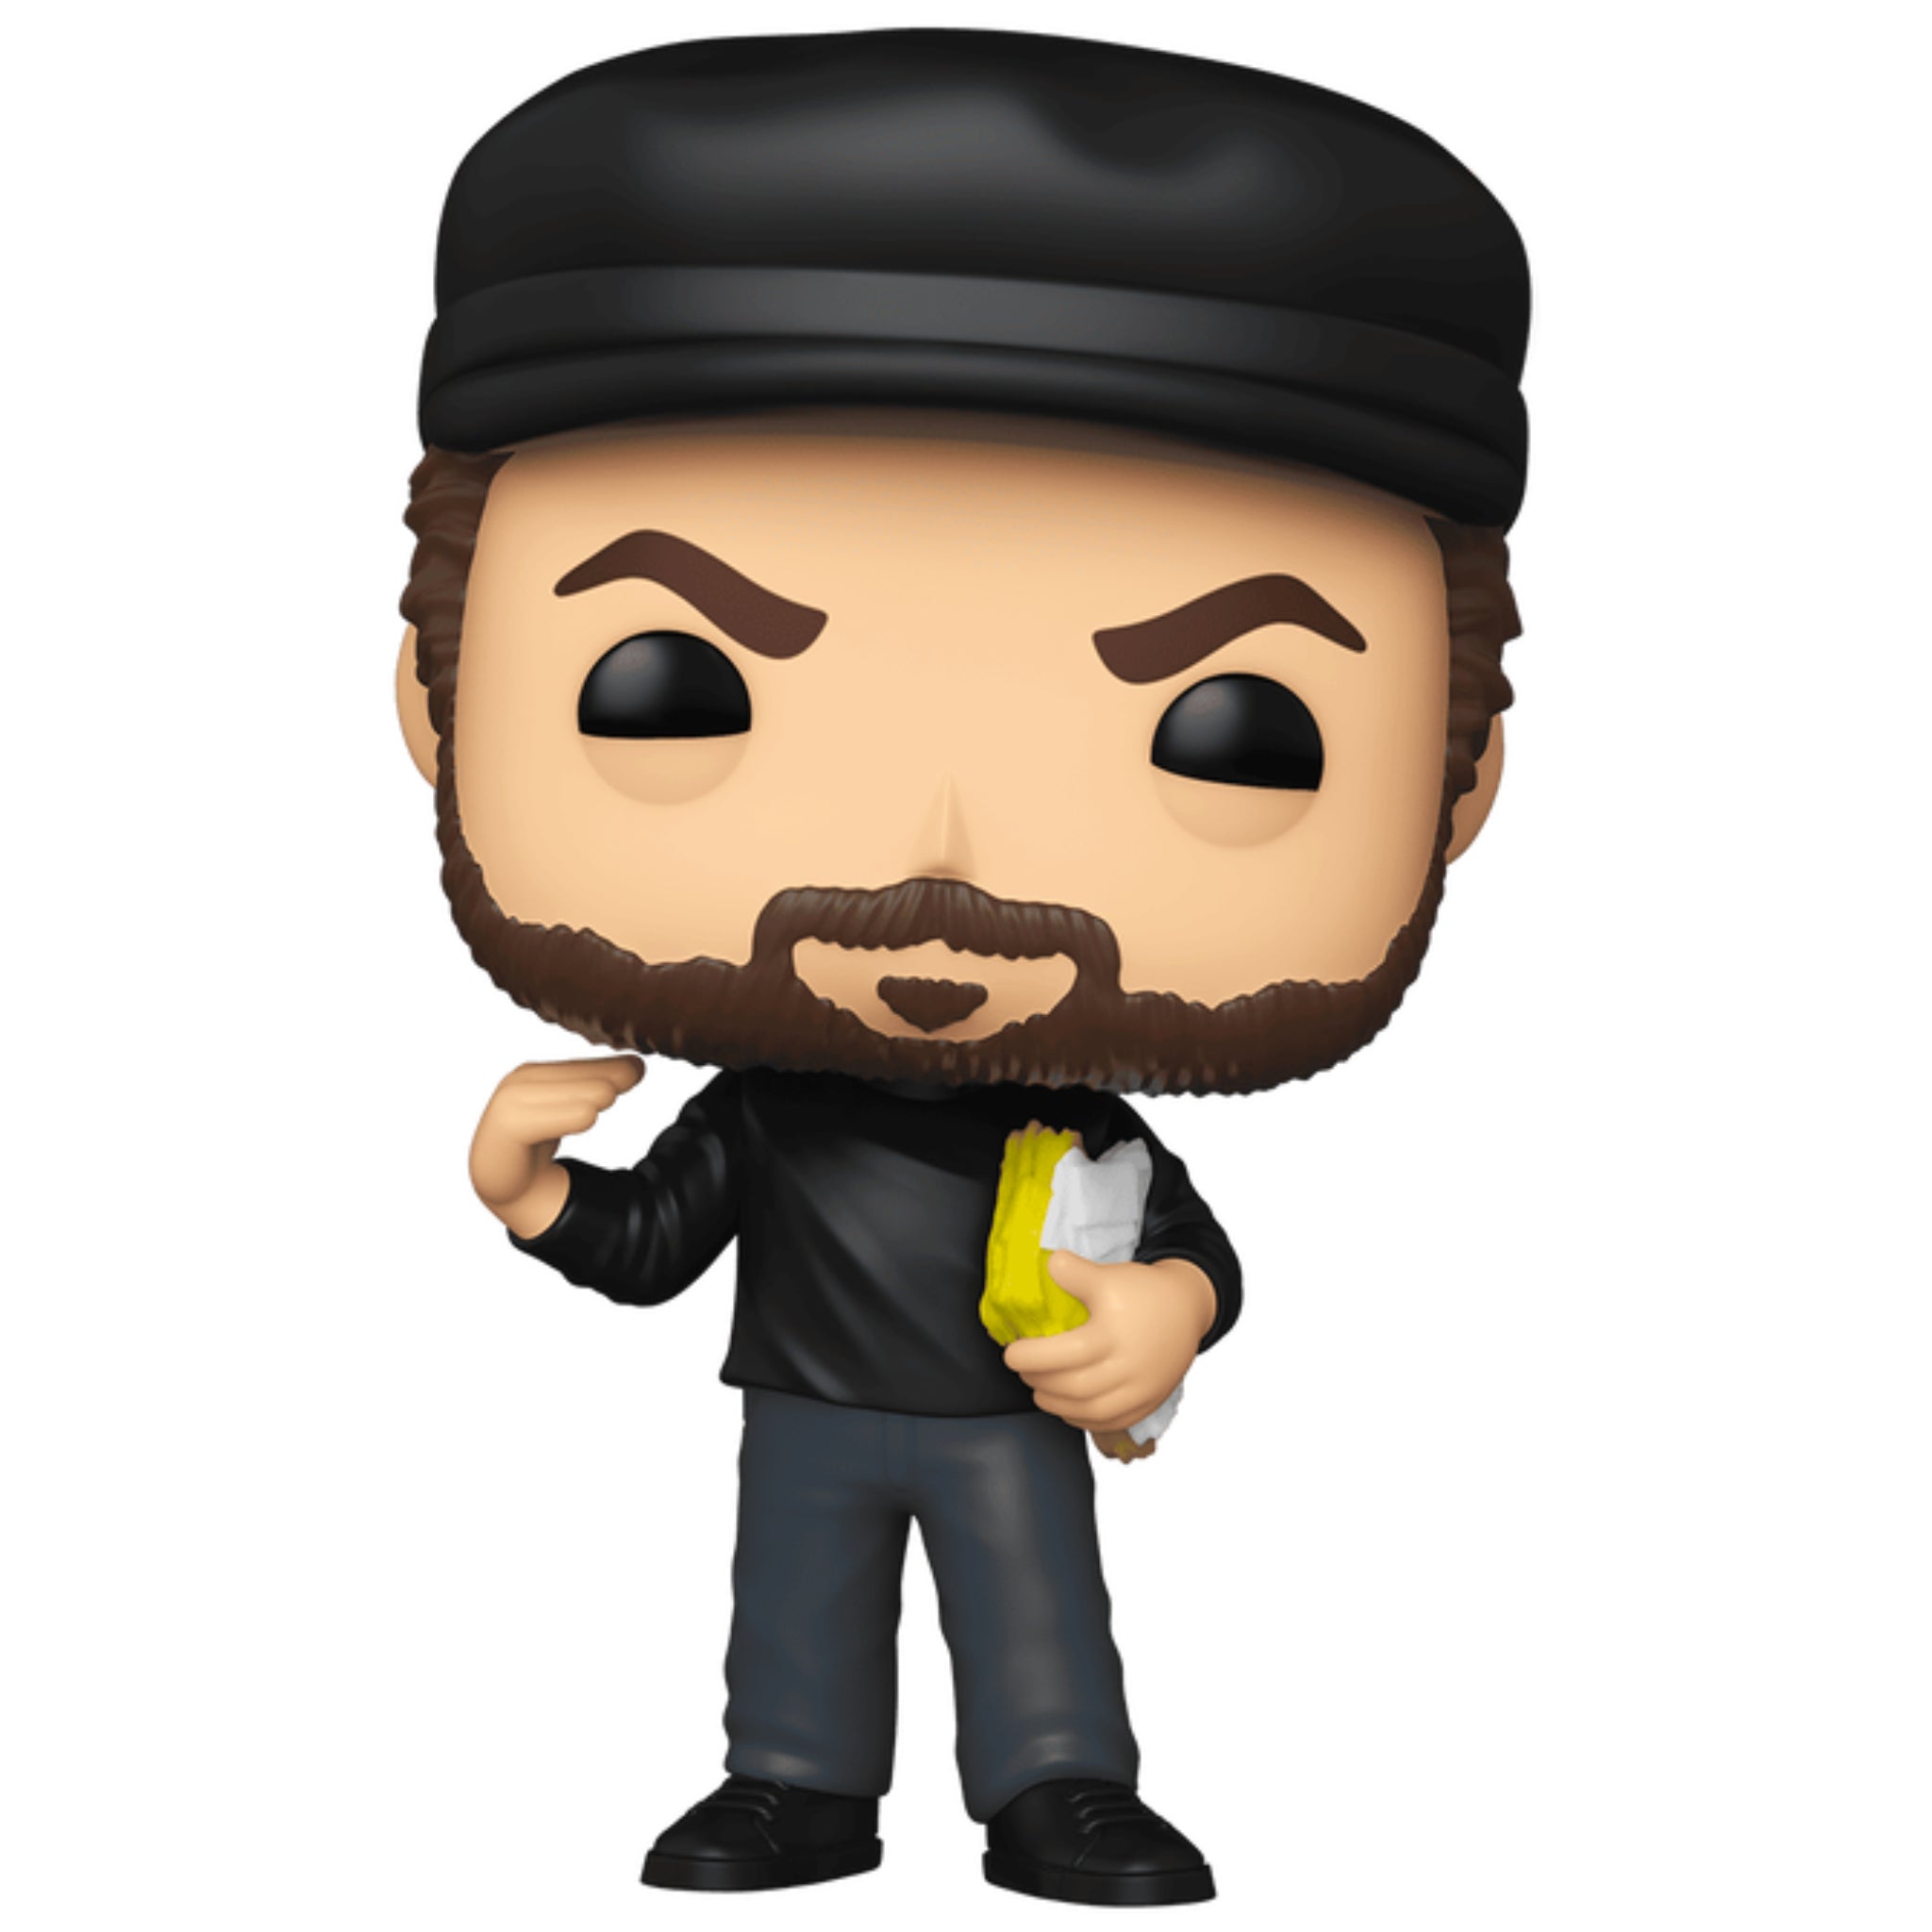 Charlie as the Director Funko Pop! FUNKO EXCLUSIVE